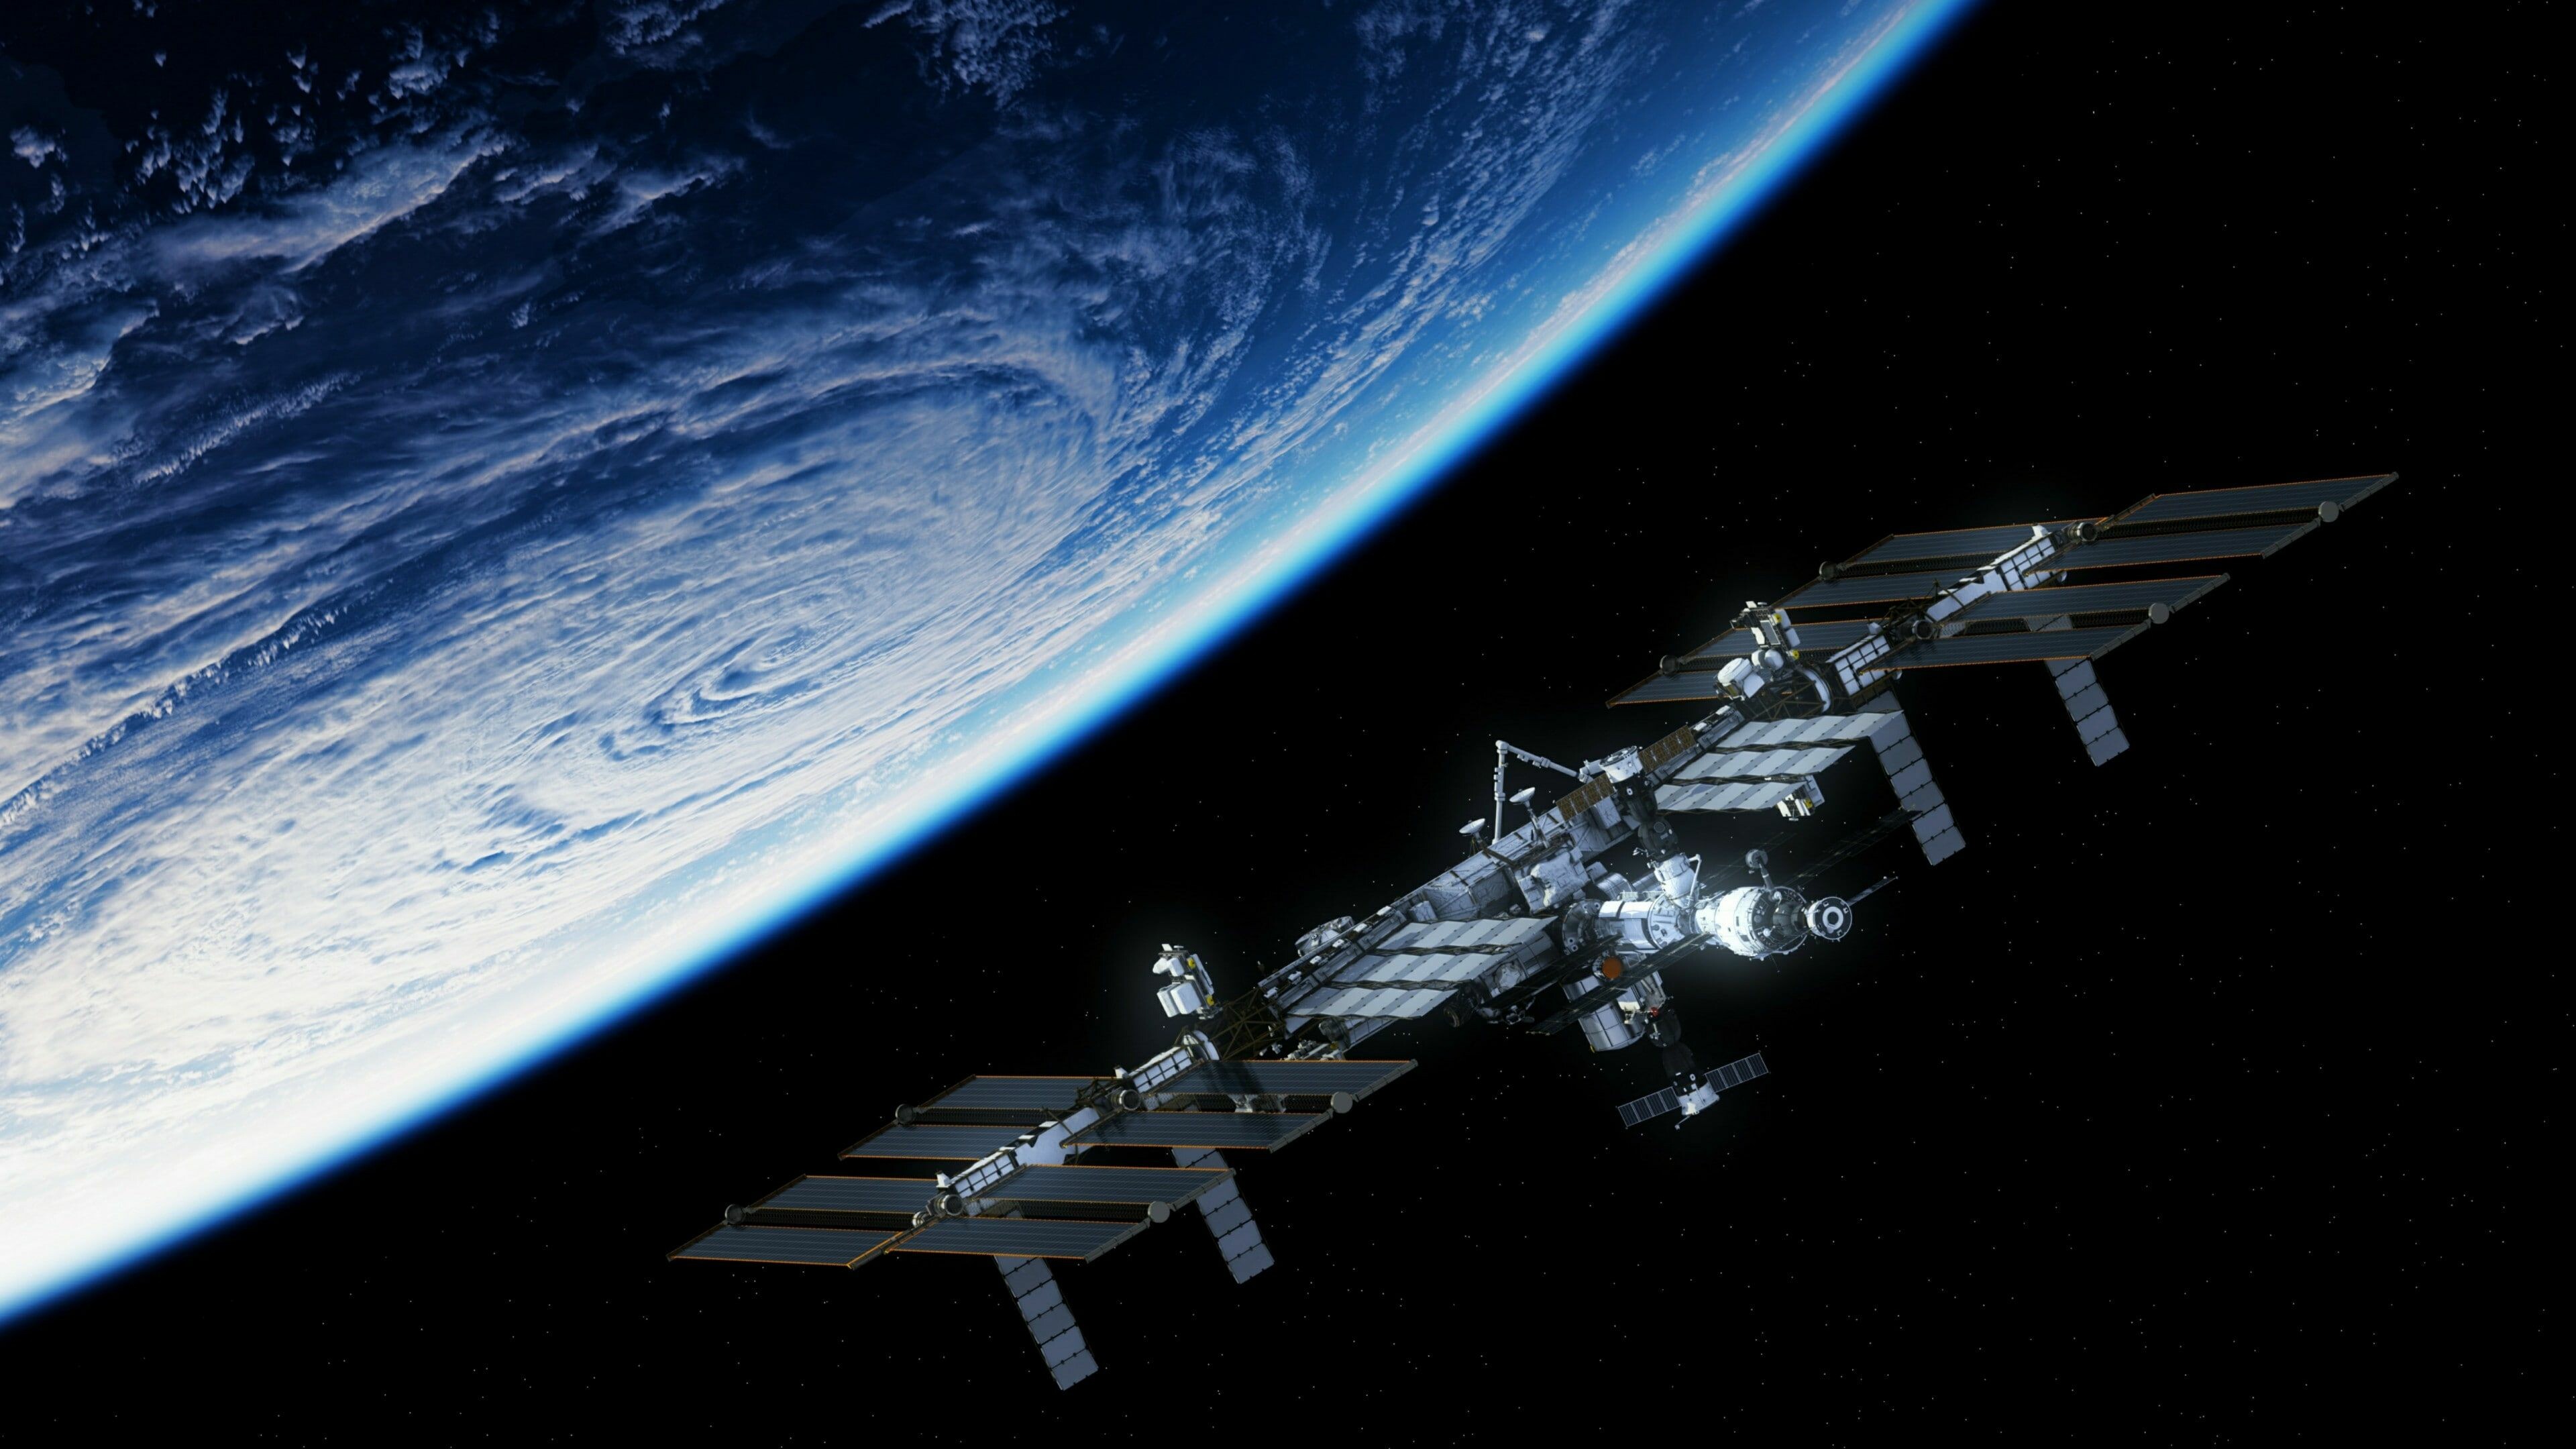 Space Station: ISS, the largest modular artificial satellite in low Earth orbit. 3840x2160 4K Background.